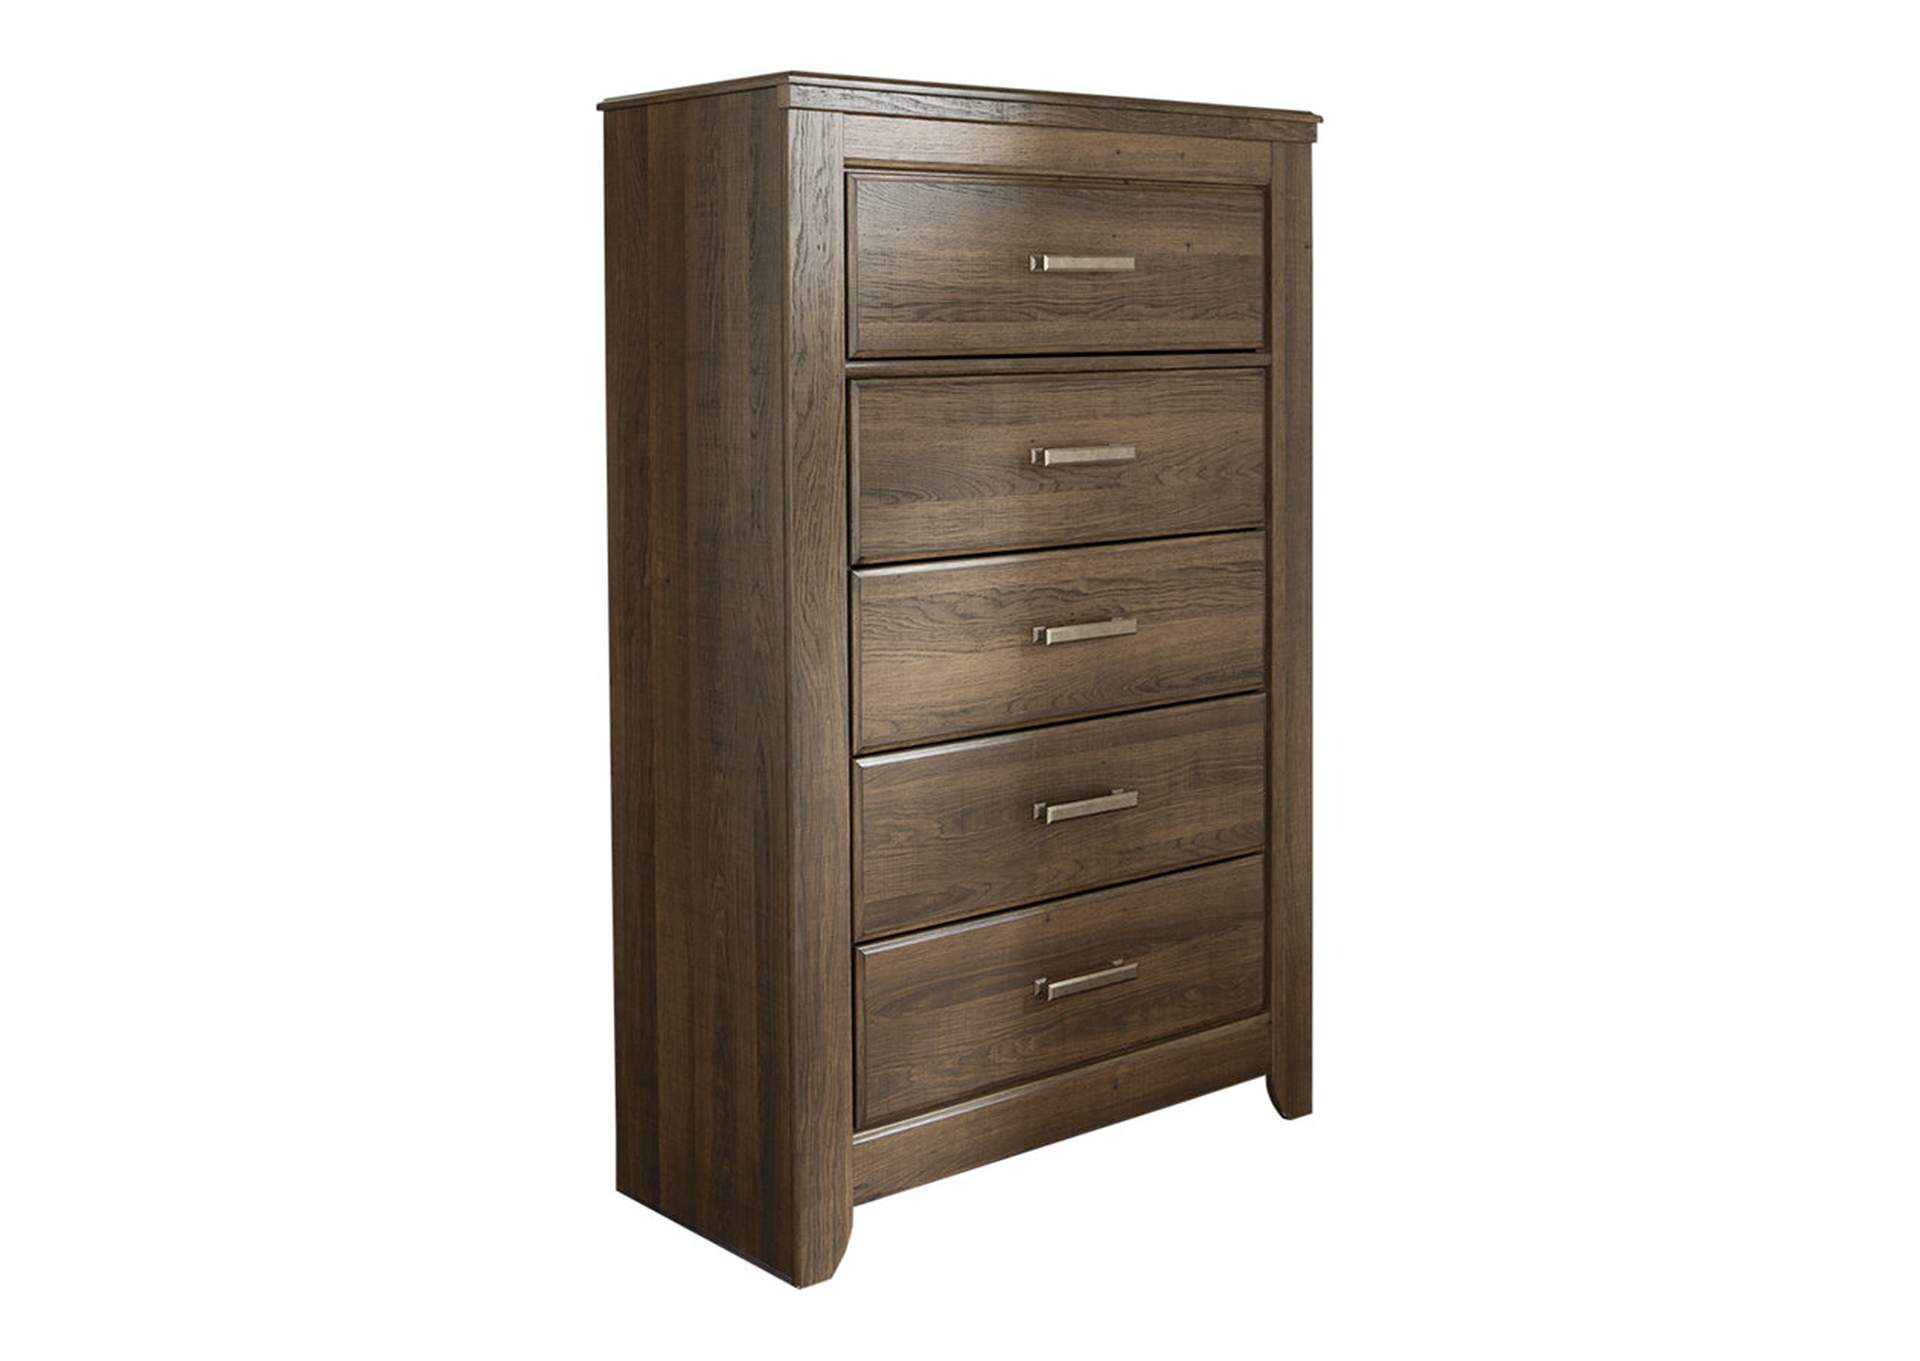 Juararo Chest of Drawers,Signature Design By Ashley